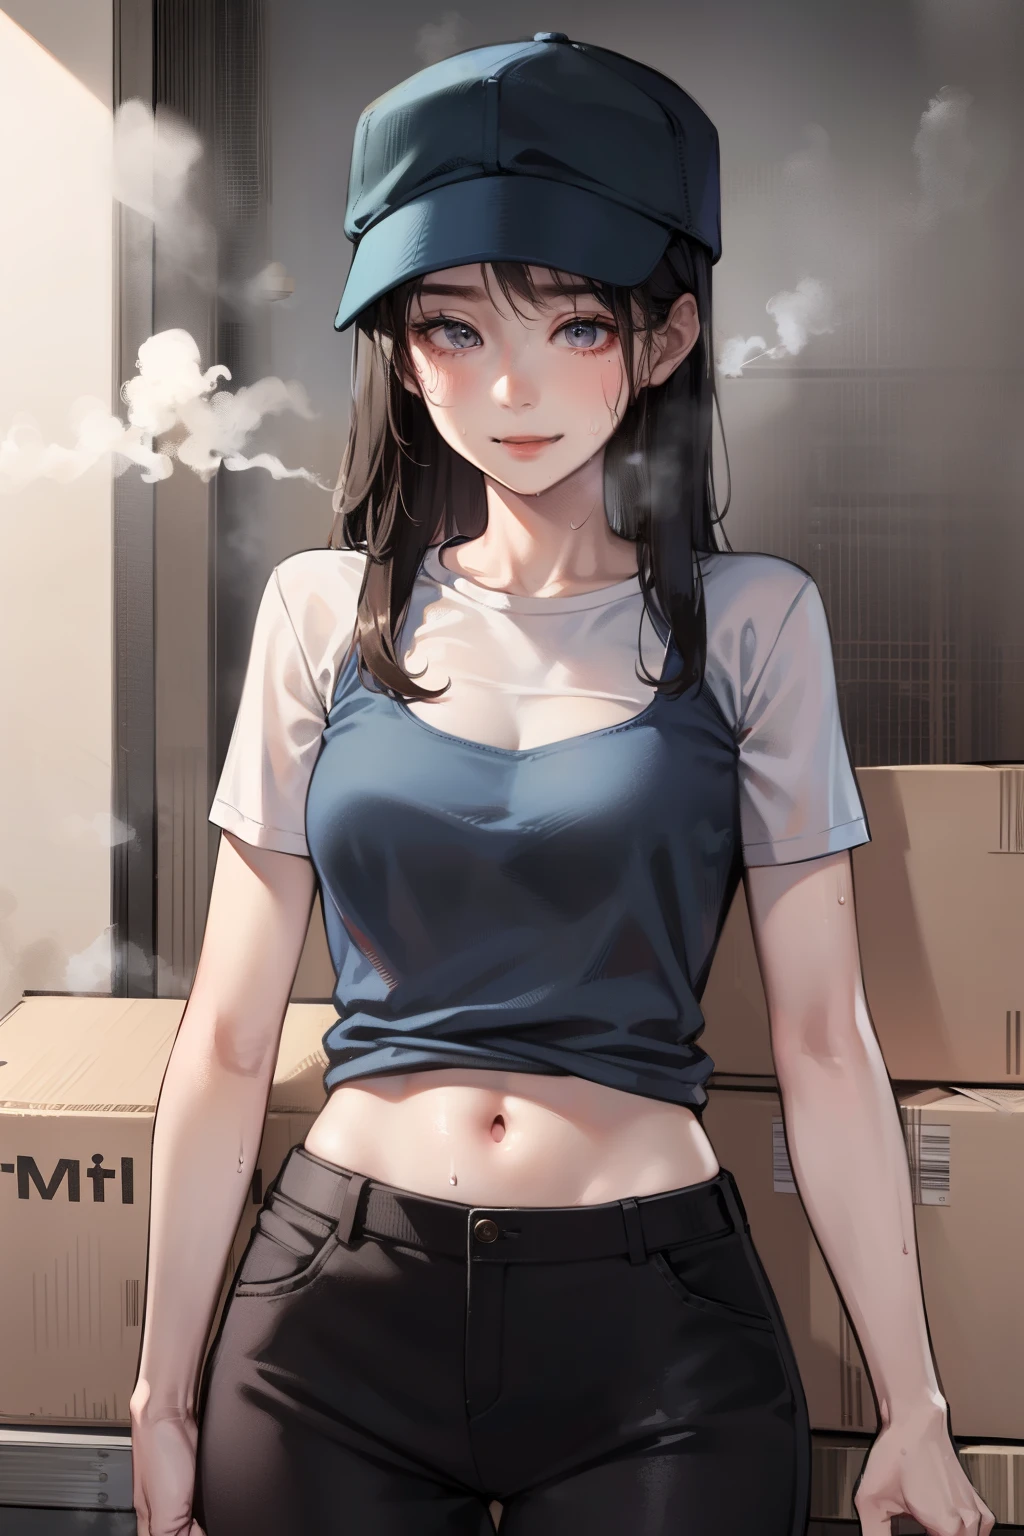 lift the cardboard、cargo carrier , white tank top workwear, Khaki cargo pants, Red gloves, Light Blue Cap, Moving luggage、cardboard apartment background、moving company, ((Sweat, steam)),milf,Female in her 30s、Bewitching smile、lift heavy cardboard